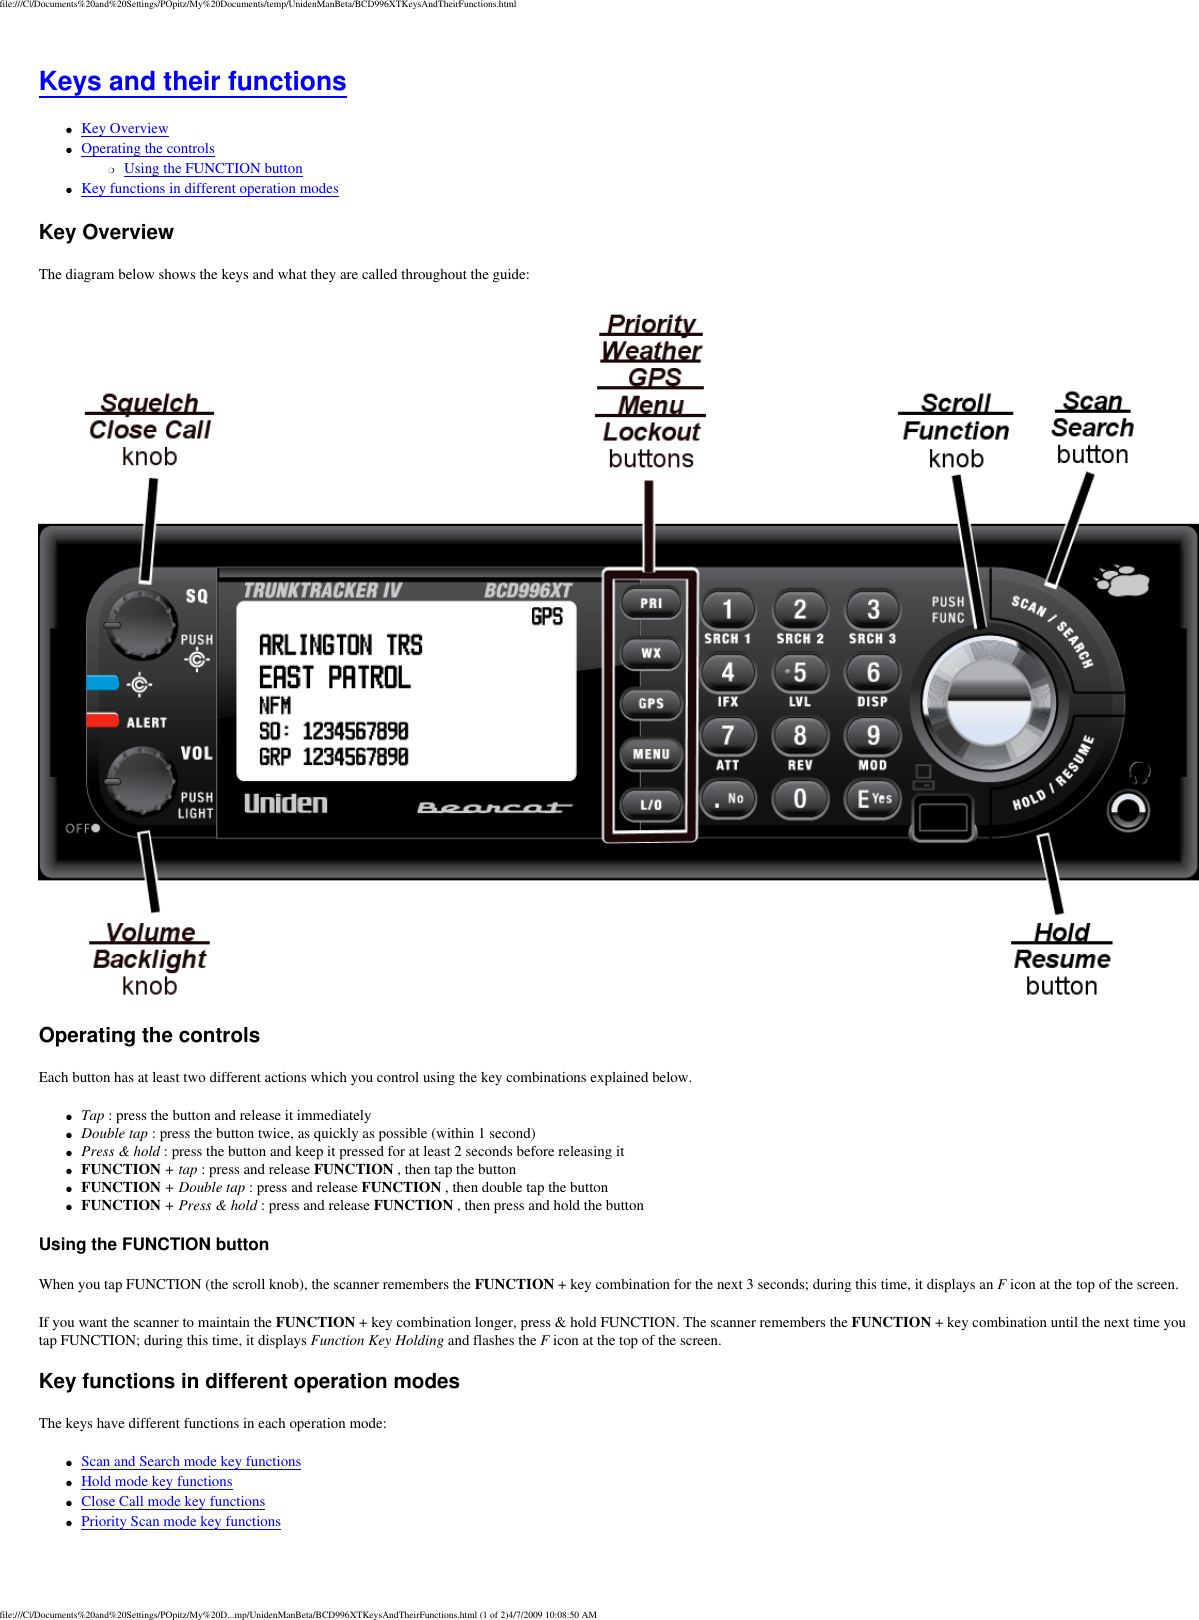 file:///C|/Documents%20and%20Settings/POpitz/My%20Documents/temp/UnidenManBeta/BCD996XTKeysAndTheirFunctions.htmlKeys and their functions ●     Key Overview ●     Operating the controls ❍     Using the FUNCTION button ●     Key functions in different operation modes Key Overview The diagram below shows the keys and what they are called throughout the guide:  Operating the controls Each button has at least two different actions which you control using the key combinations explained below. ●     Tap : press the button and release it immediately ●     Double tap : press the button twice, as quickly as possible (within 1 second) ●     Press &amp; hold : press the button and keep it pressed for at least 2 seconds before releasing it ●     FUNCTION + tap : press and release FUNCTION , then tap the button ●     FUNCTION + Double tap : press and release FUNCTION , then double tap the button ●     FUNCTION + Press &amp; hold : press and release FUNCTION , then press and hold the button Using the FUNCTION button When you tap FUNCTION (the scroll knob), the scanner remembers the FUNCTION + key combination for the next 3 seconds; during this time, it displays an F icon at the top of the screen. If you want the scanner to maintain the FUNCTION + key combination longer, press &amp; hold FUNCTION. The scanner remembers the FUNCTION + key combination until the next time you tap FUNCTION; during this time, it displays Function Key Holding and flashes the F icon at the top of the screen. Key functions in different operation modes The keys have different functions in each operation mode: ●     Scan and Search mode key functions ●     Hold mode key functions ●     Close Call mode key functions ●     Priority Scan mode key functions file:///C|/Documents%20and%20Settings/POpitz/My%20D...mp/UnidenManBeta/BCD996XTKeysAndTheirFunctions.html (1 of 2)4/7/2009 10:08:50 AM